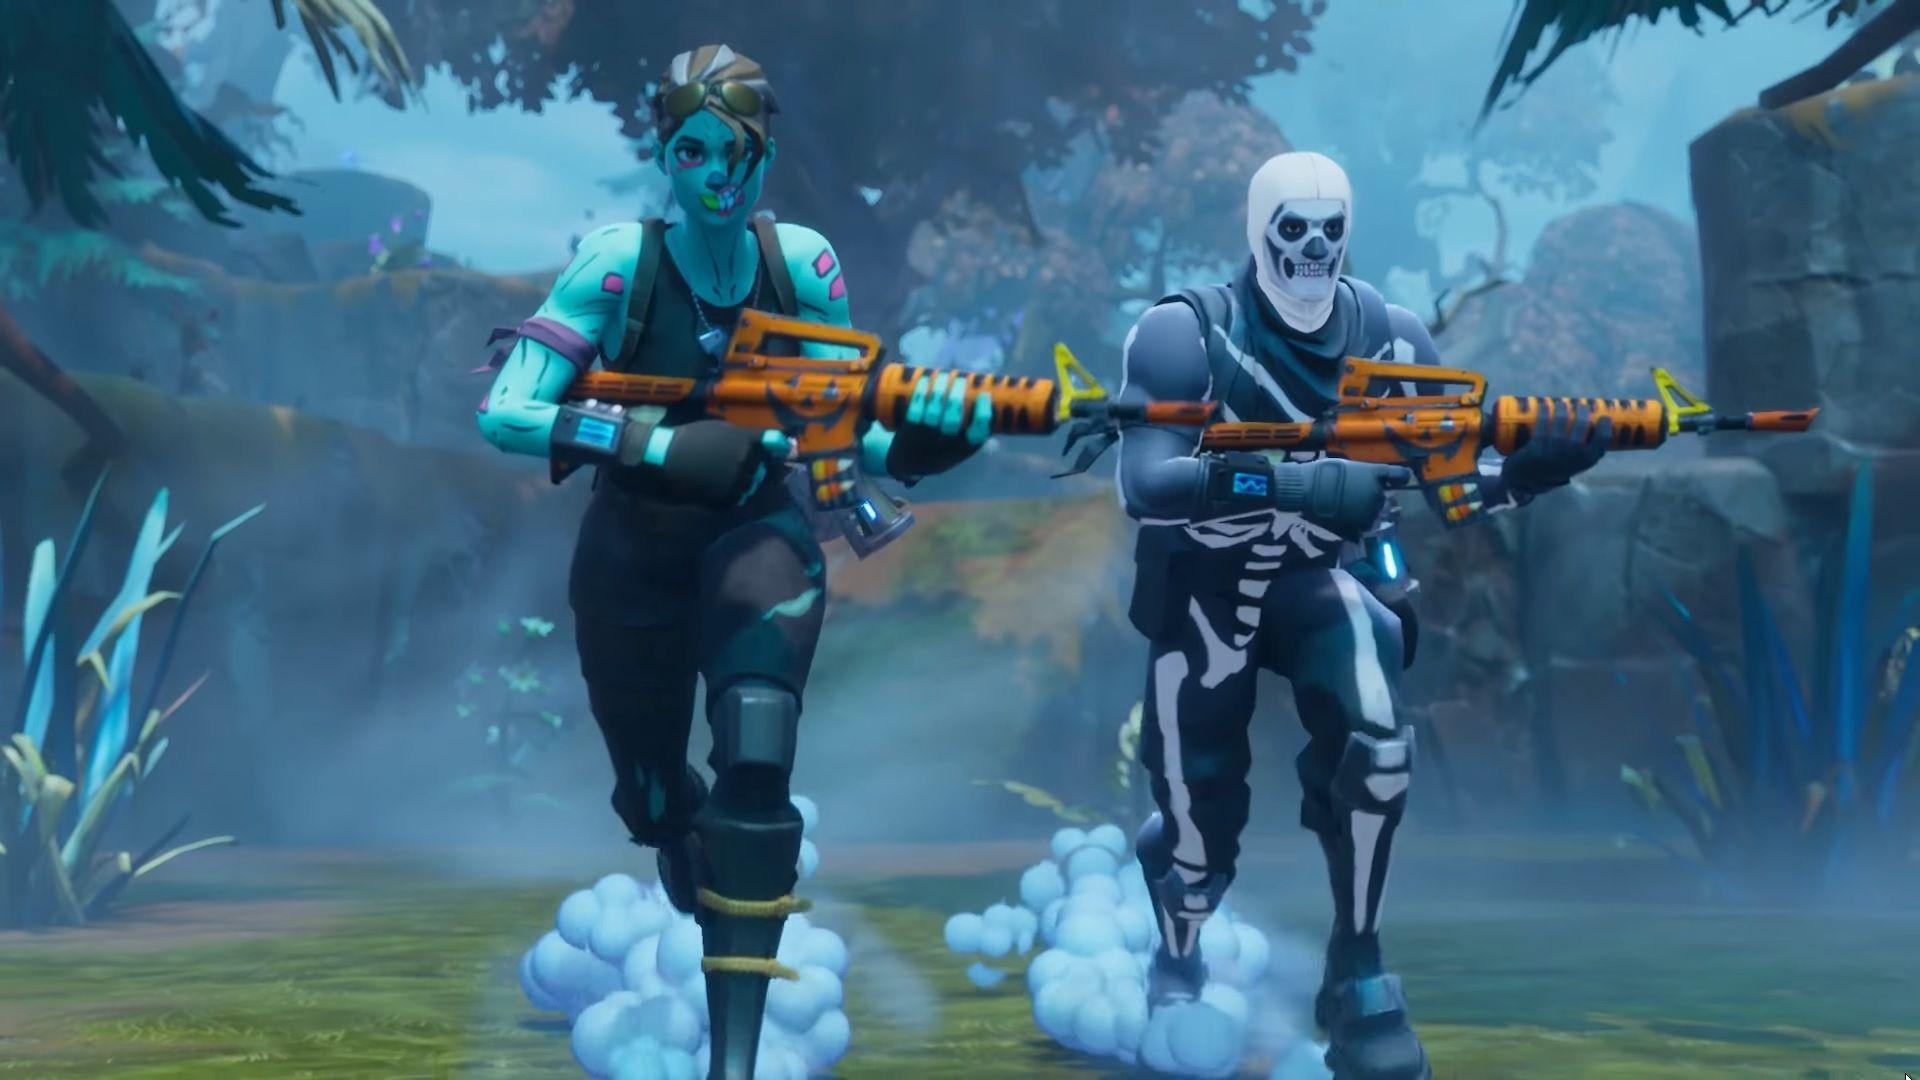 Fortnite's Fortnitemares Event Release Date Has Been Leaked